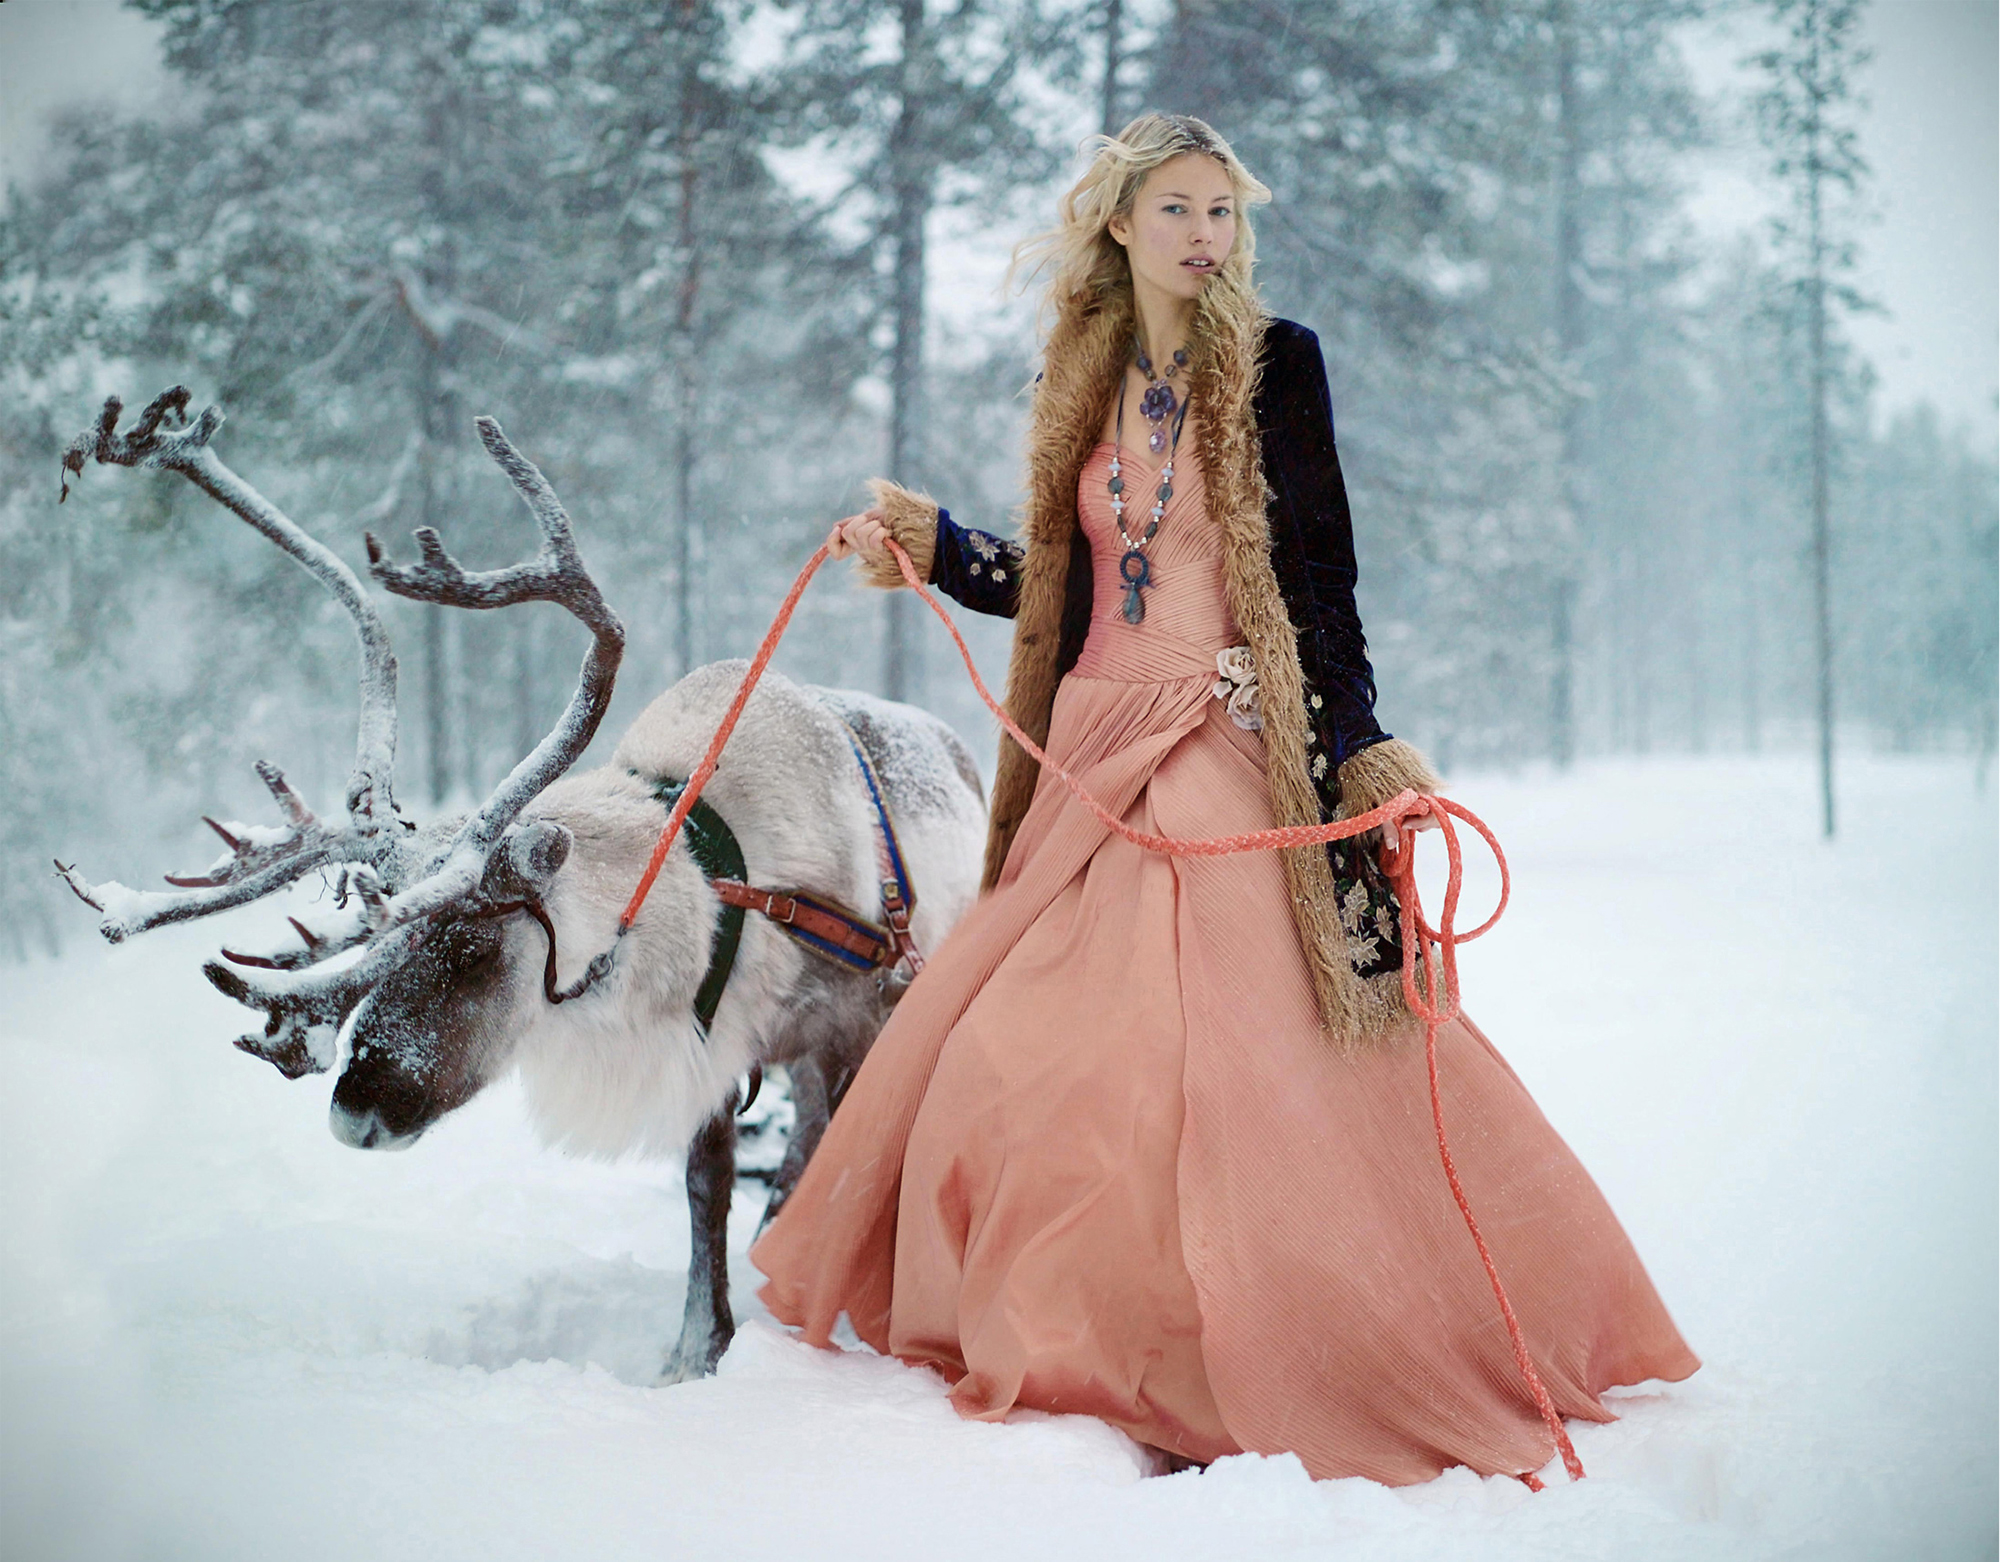 blond Finnish model in he snow Lapland wearing white long bridal ball dress and winter fur coat with forest in the background